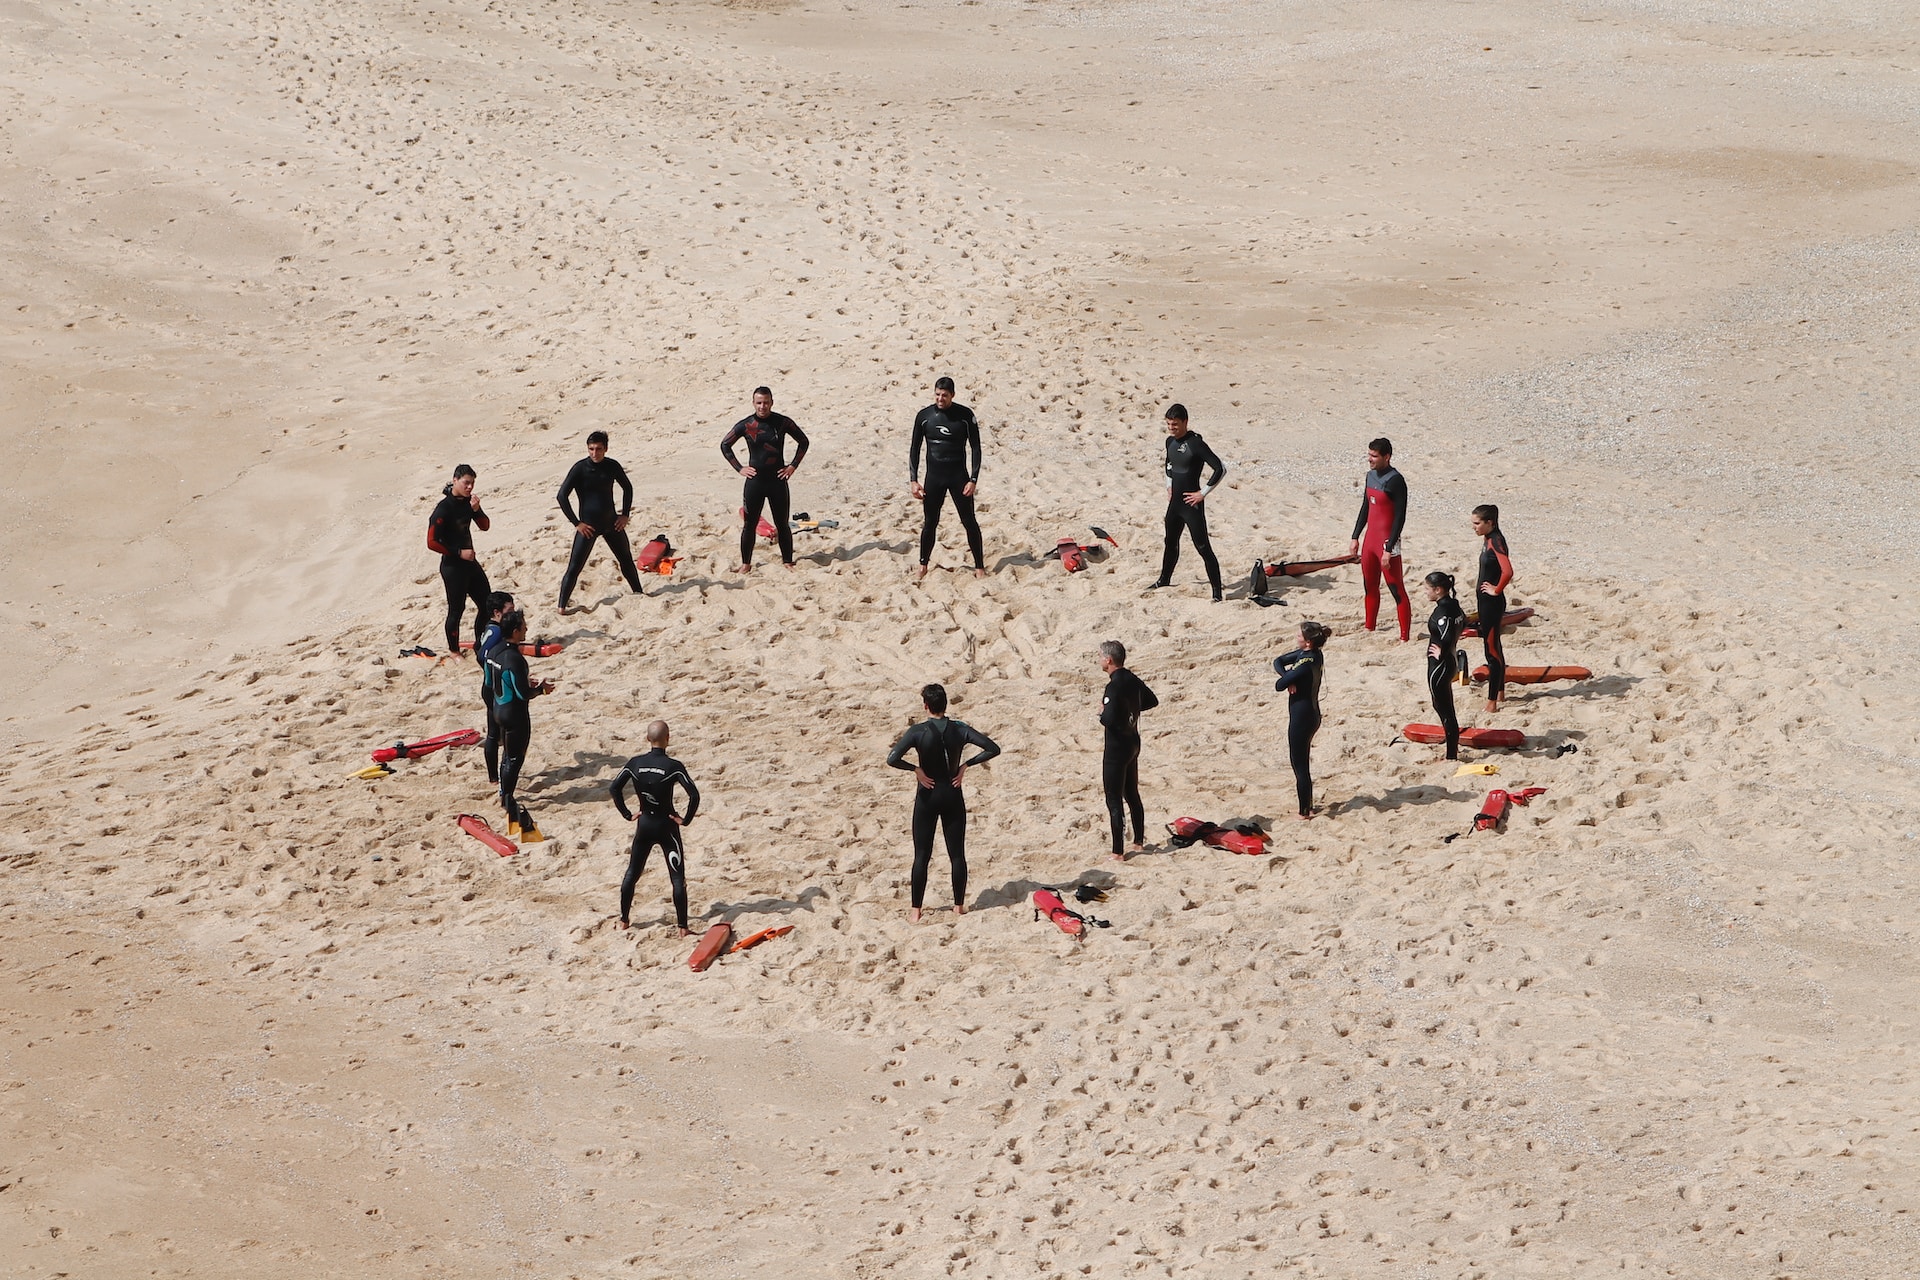 the image shows the divers standing in a circle at the beach 